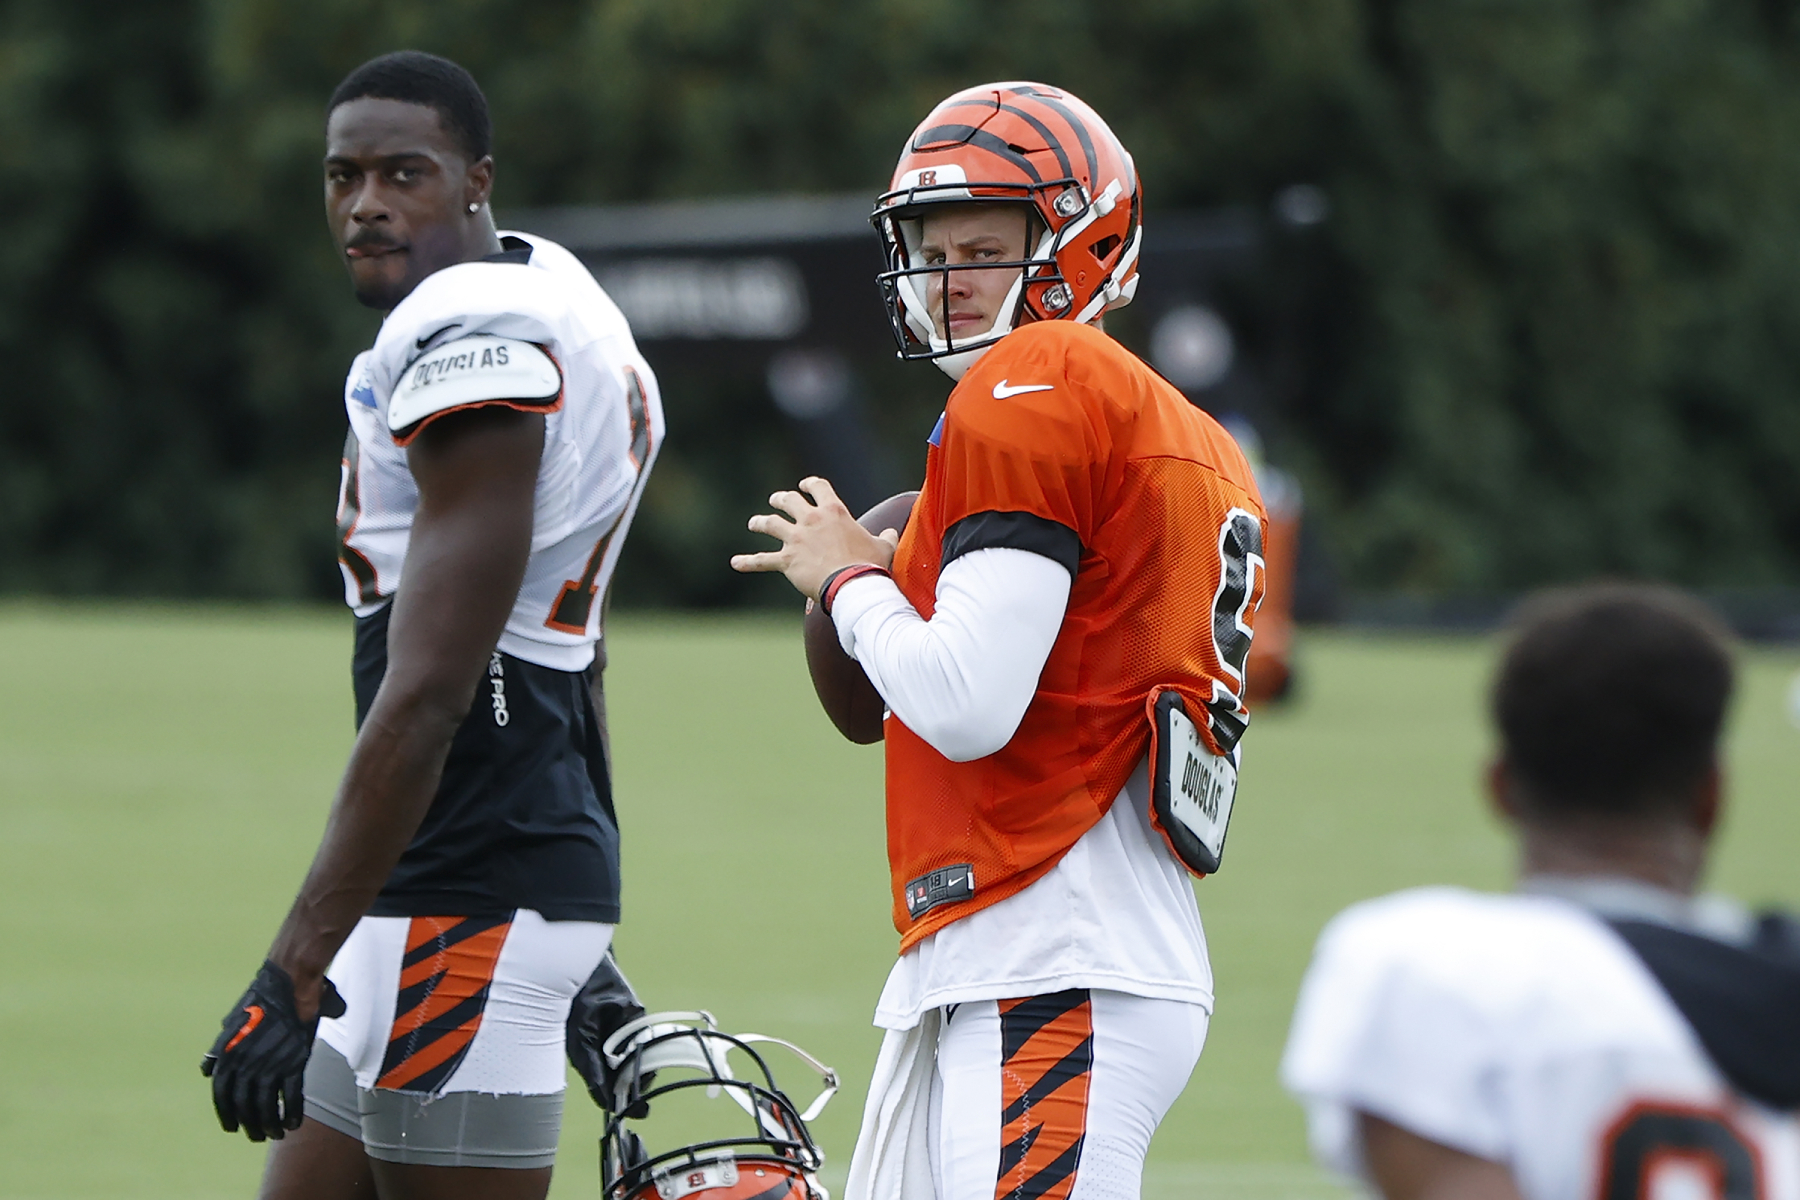 While many teams and athletes are protesting racism in America, Joe Burrow and the Bengals just delivered a powerful message.